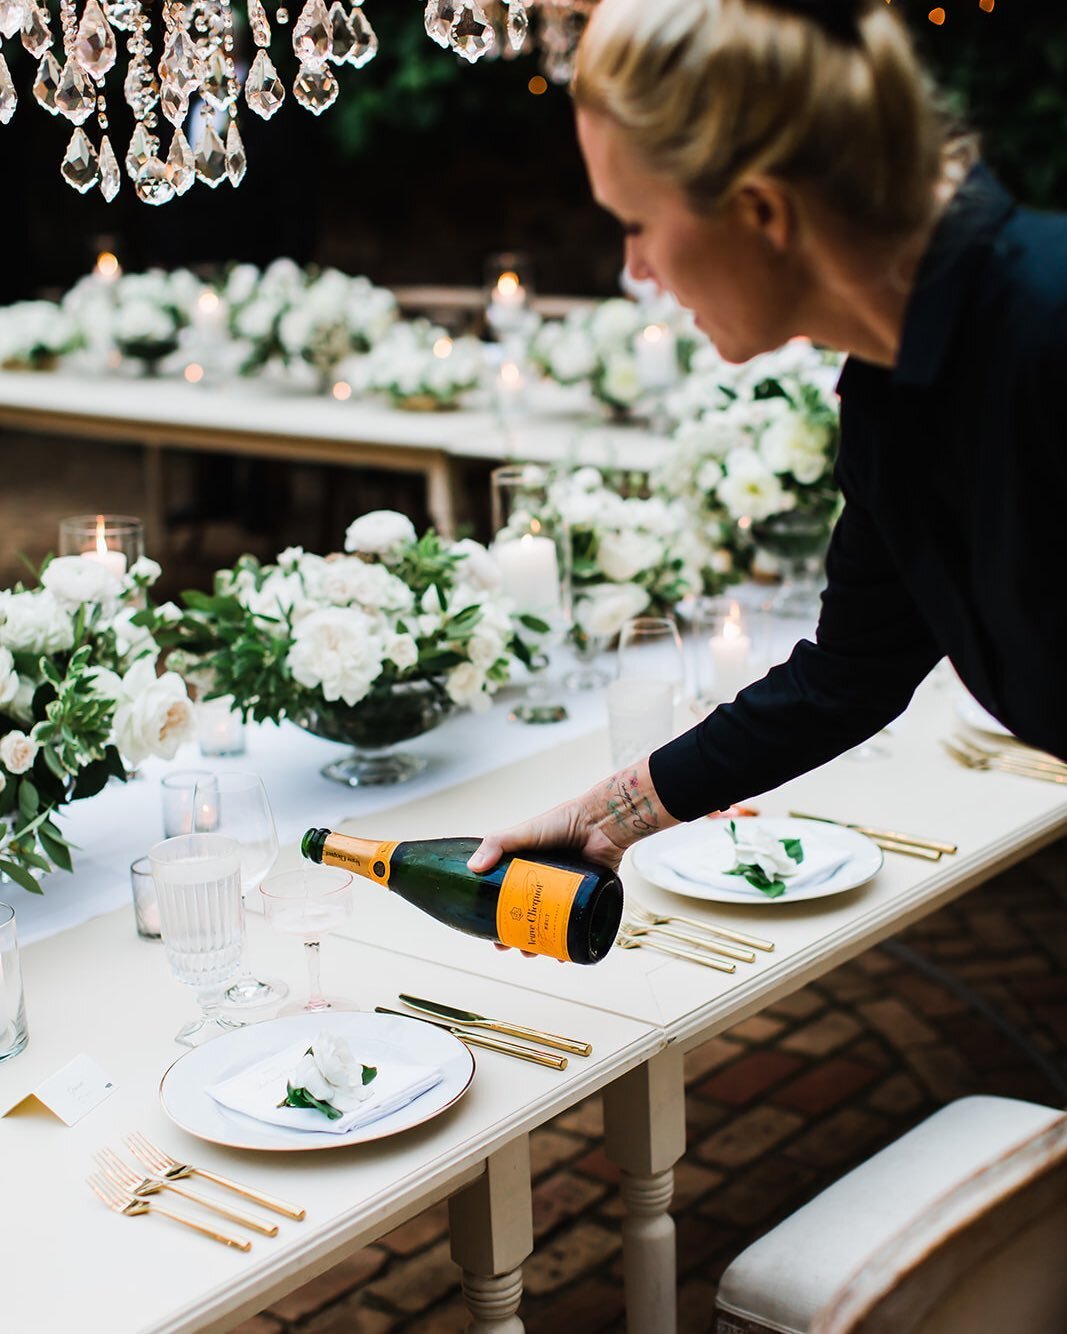 There is only one thing better than a glass of champagne - a bottle. ⁠🥂
⁠⠀
PC: @nvmauimedia⁠⠀
Place Settings: @setmaui⁠⠀
Venue: @haikumill